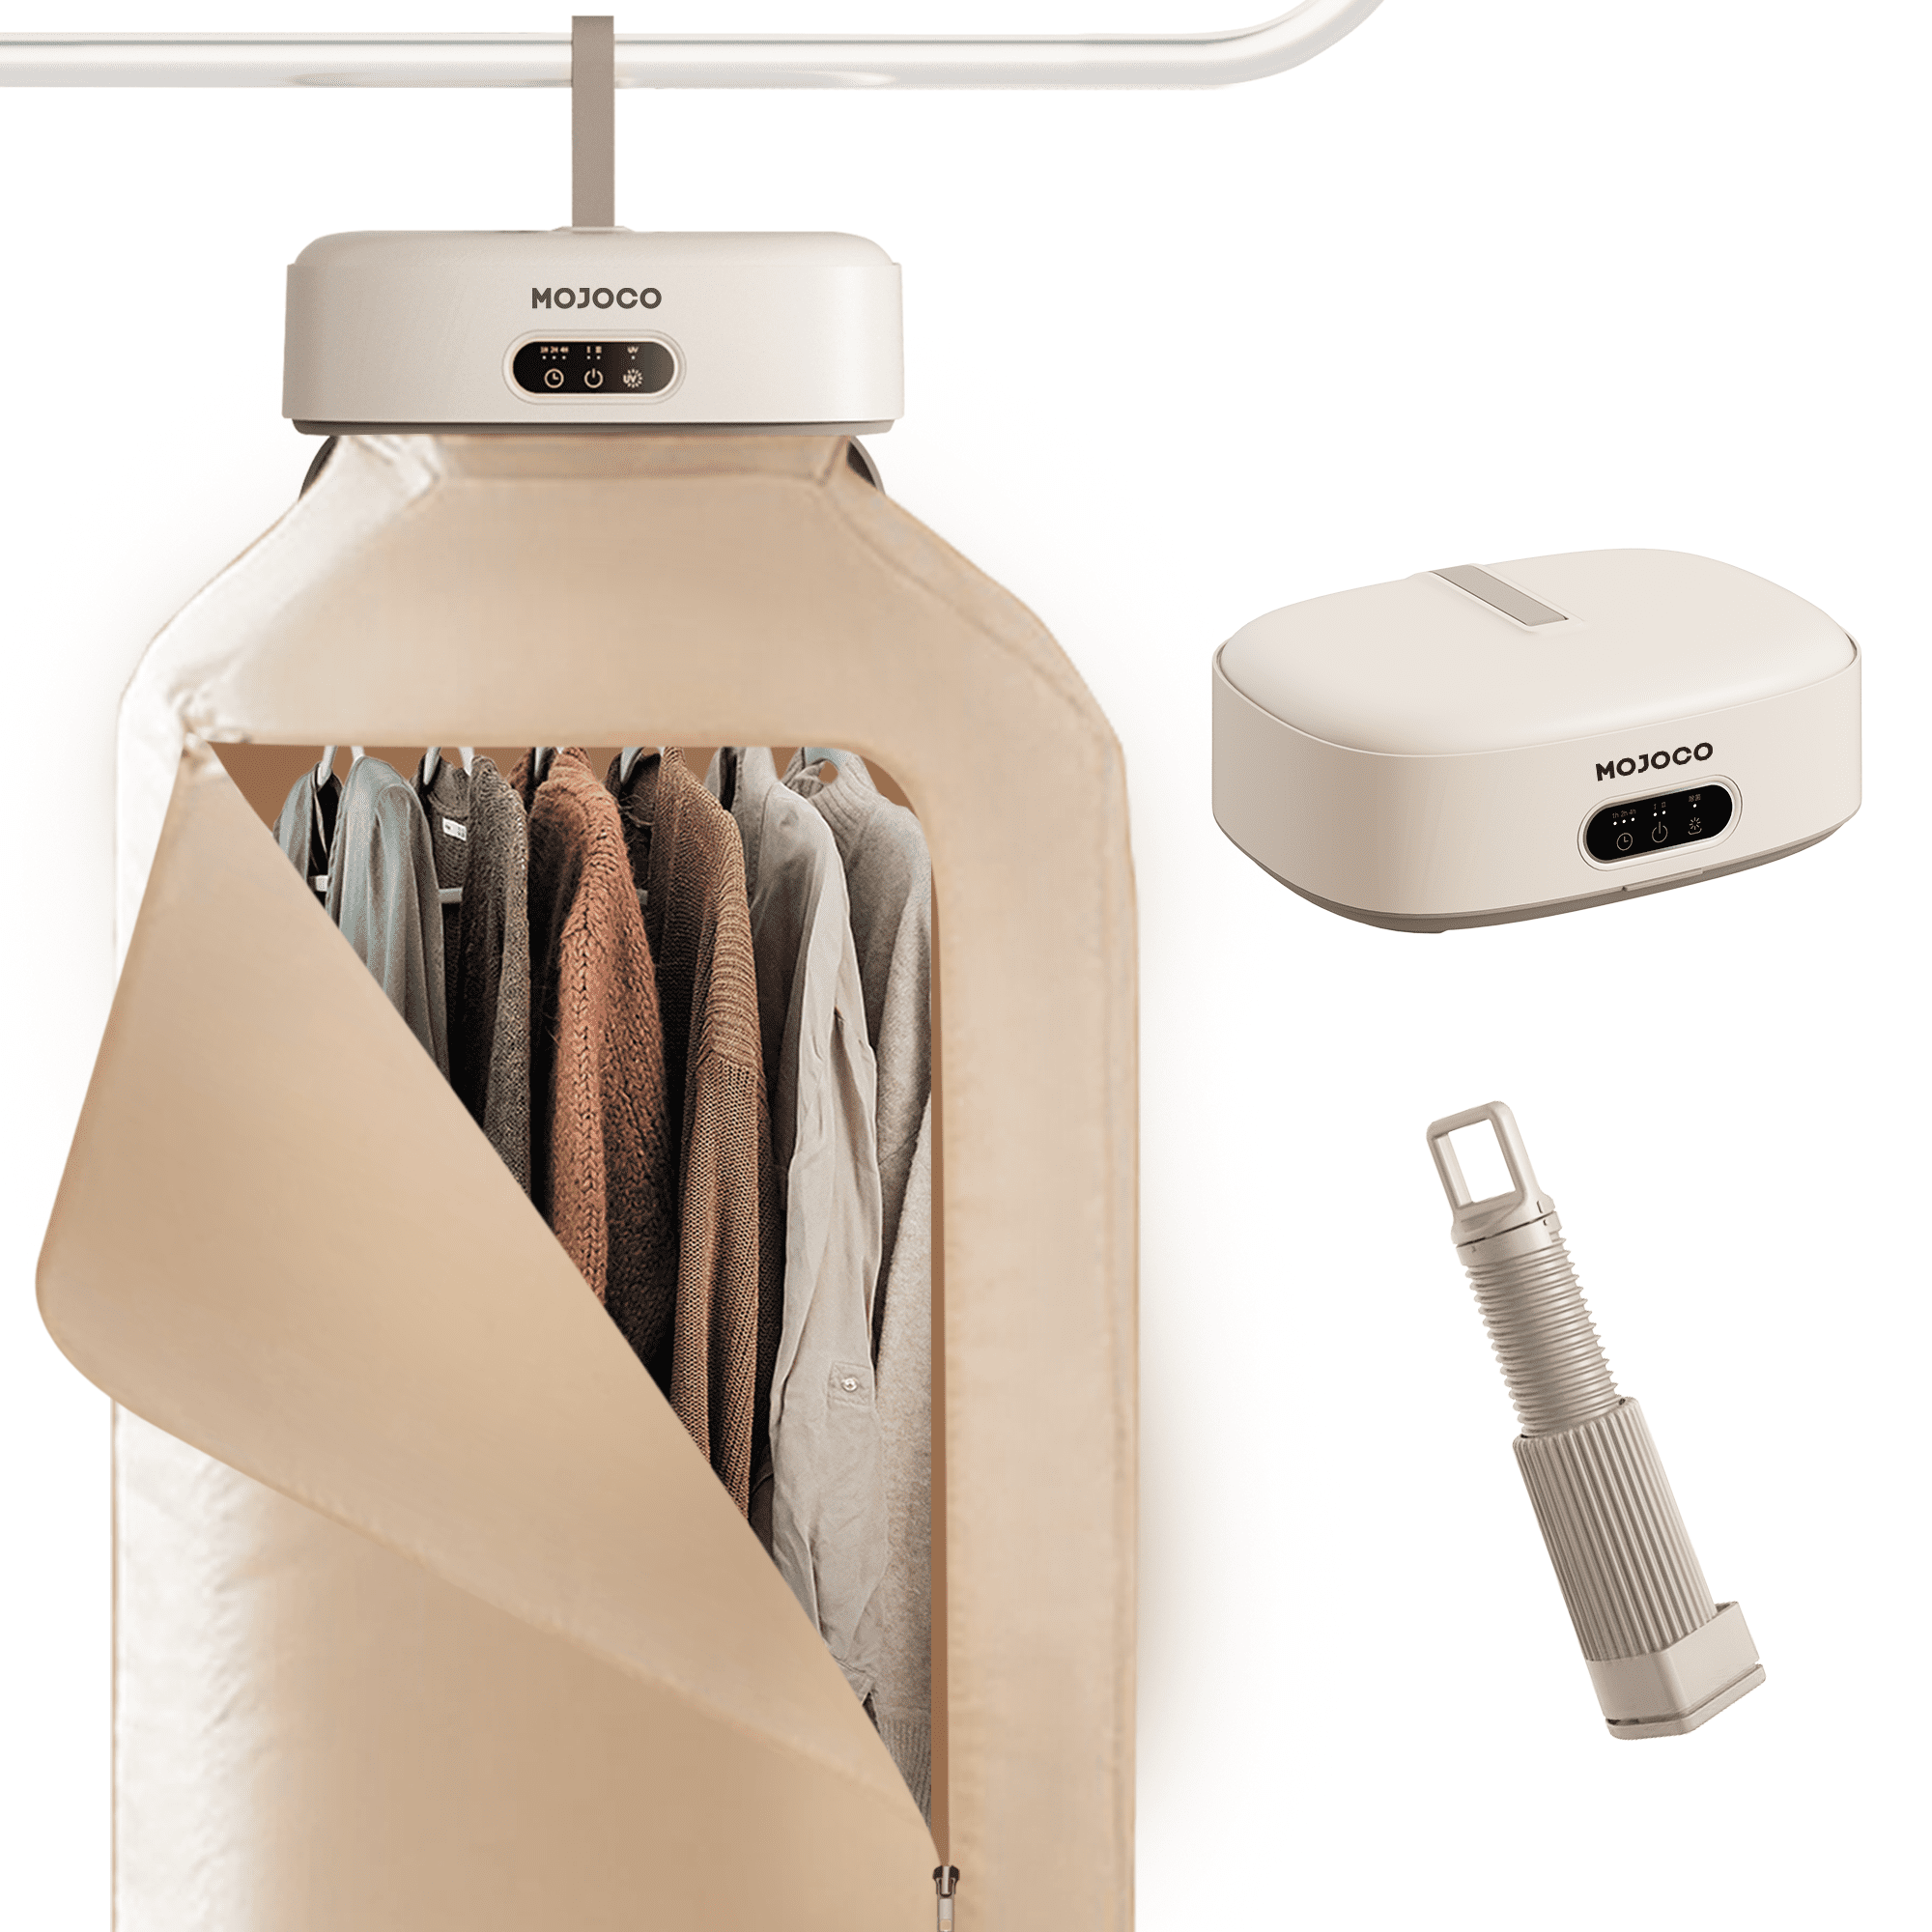 Clothes Dryer Portable Travel Mini Dryer Machine,Folding Household Mini Dryer  for Apartments,New Generation Electric Clothes Drying,Dryer Free  Installation